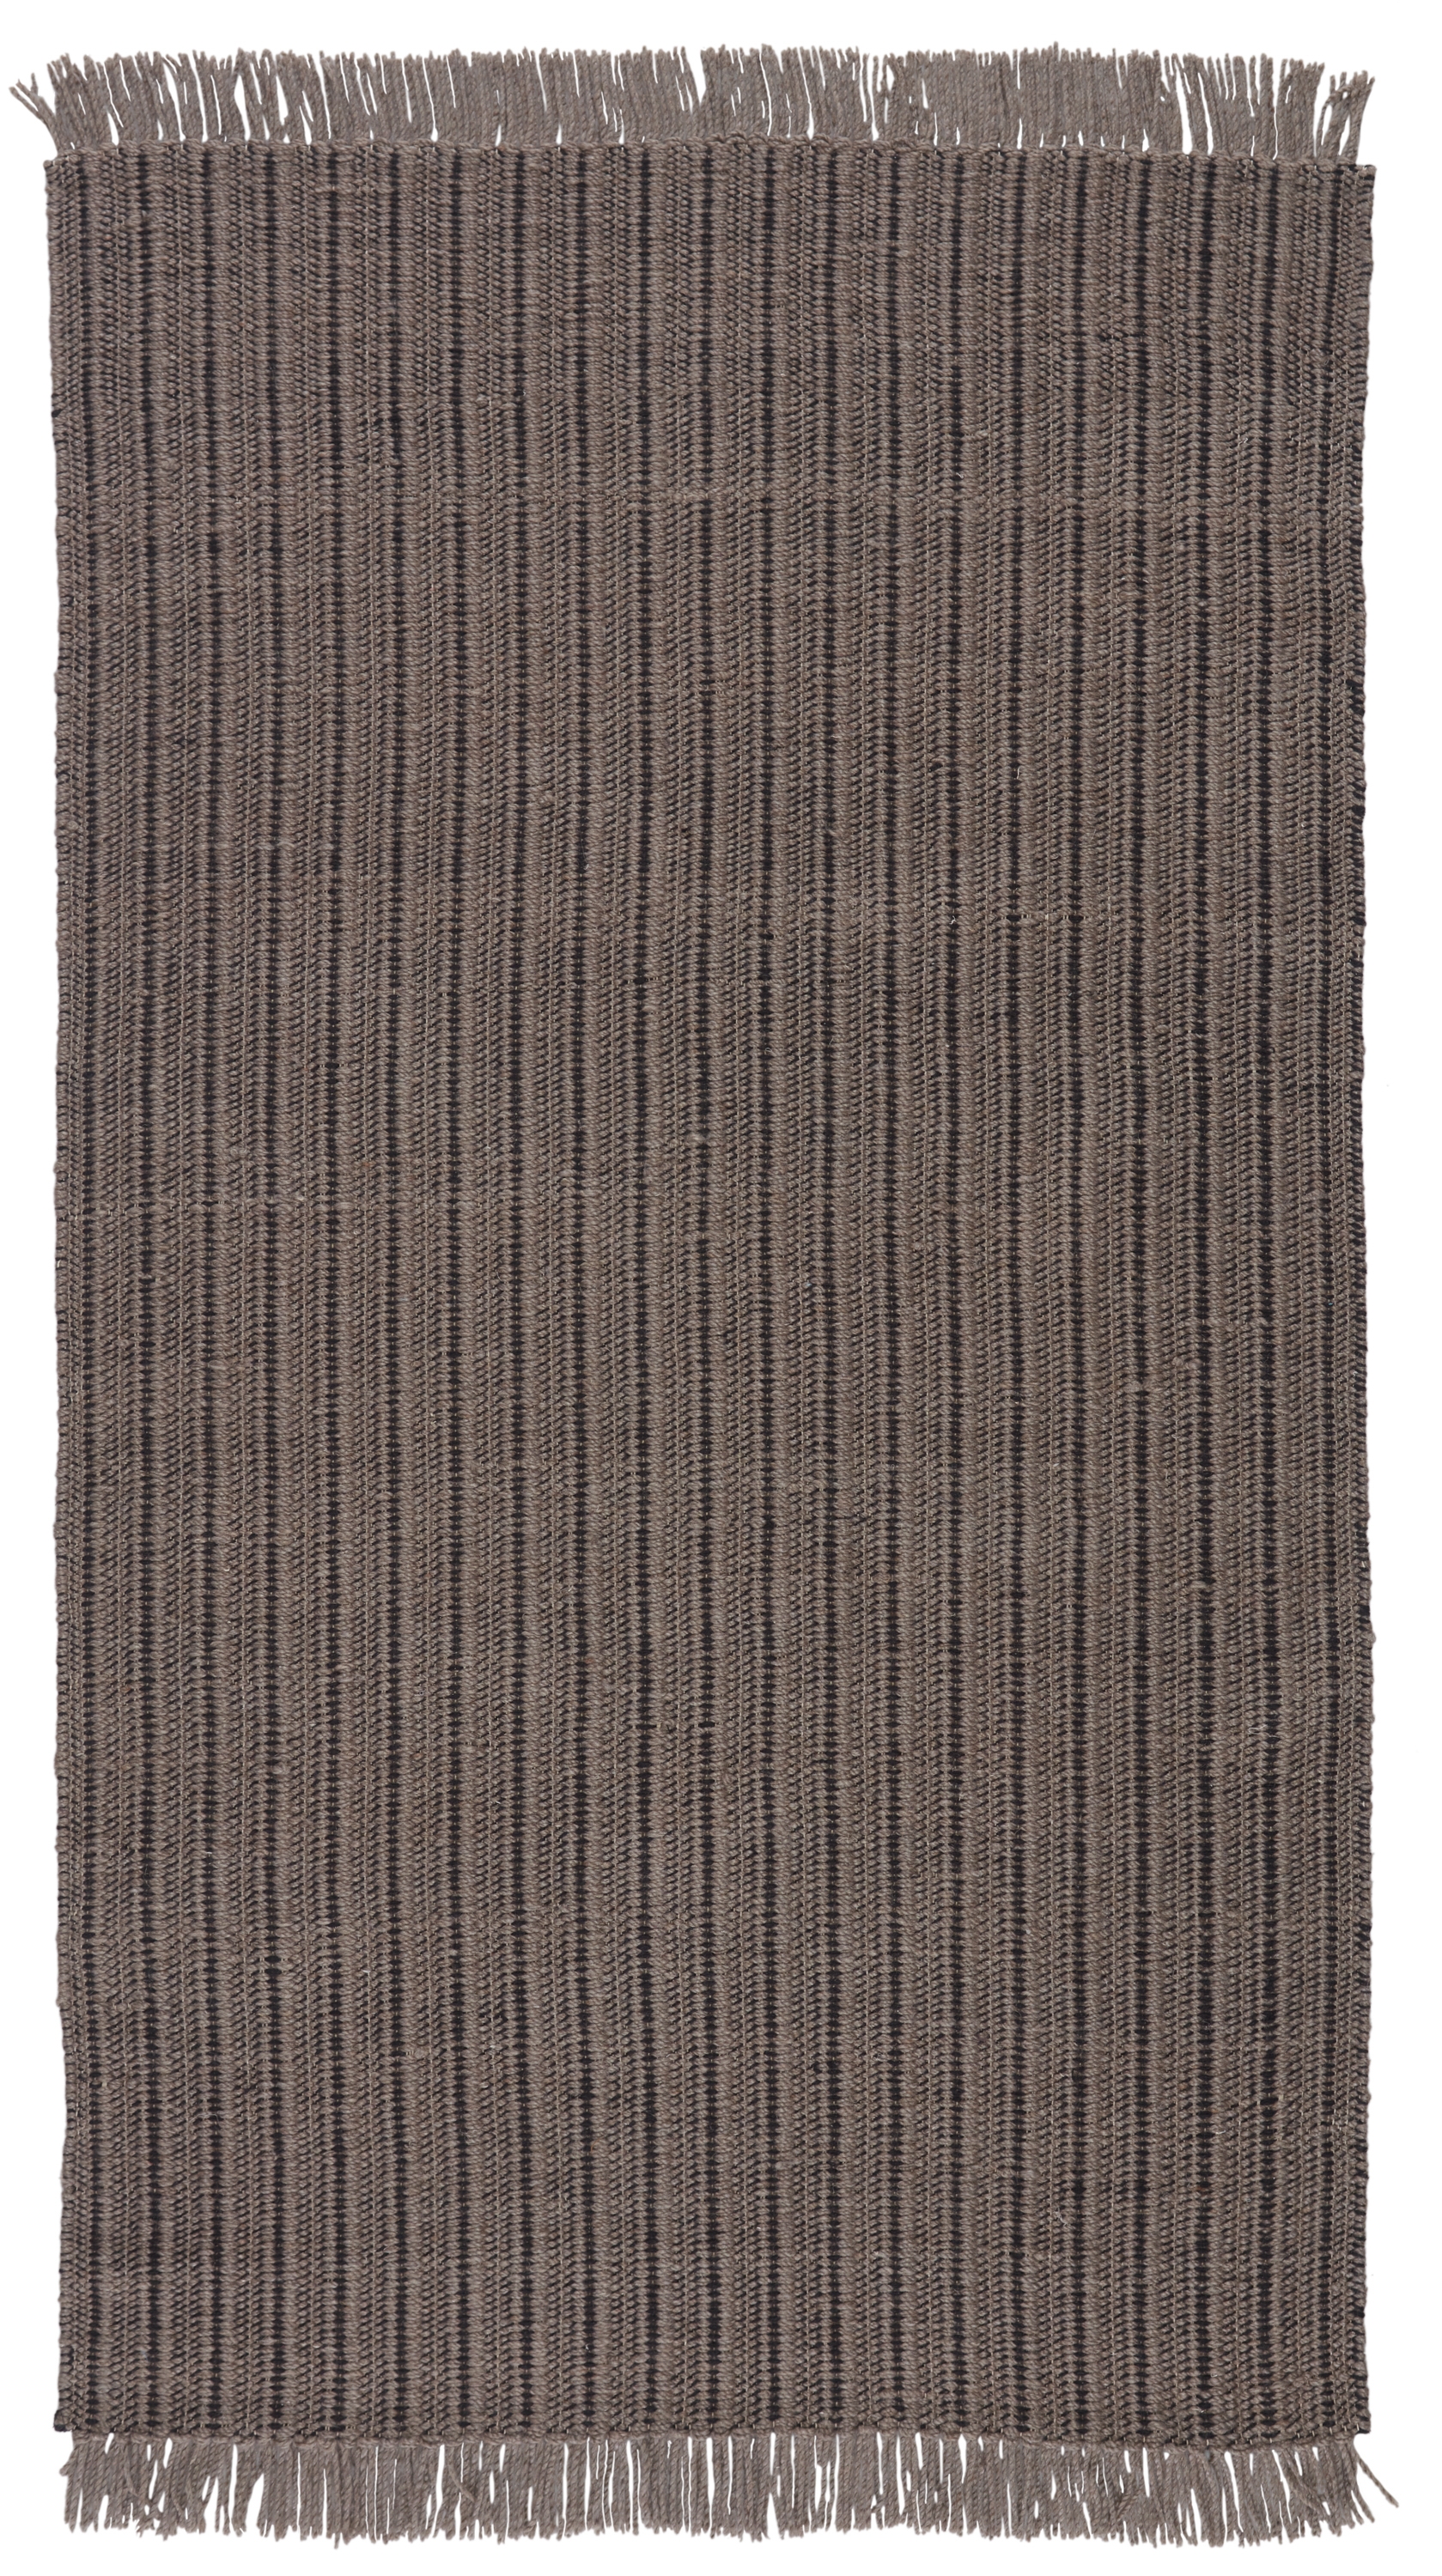 Poise Handwoven Solid Gray/ Black Area Rug (8'X10') - Image 0